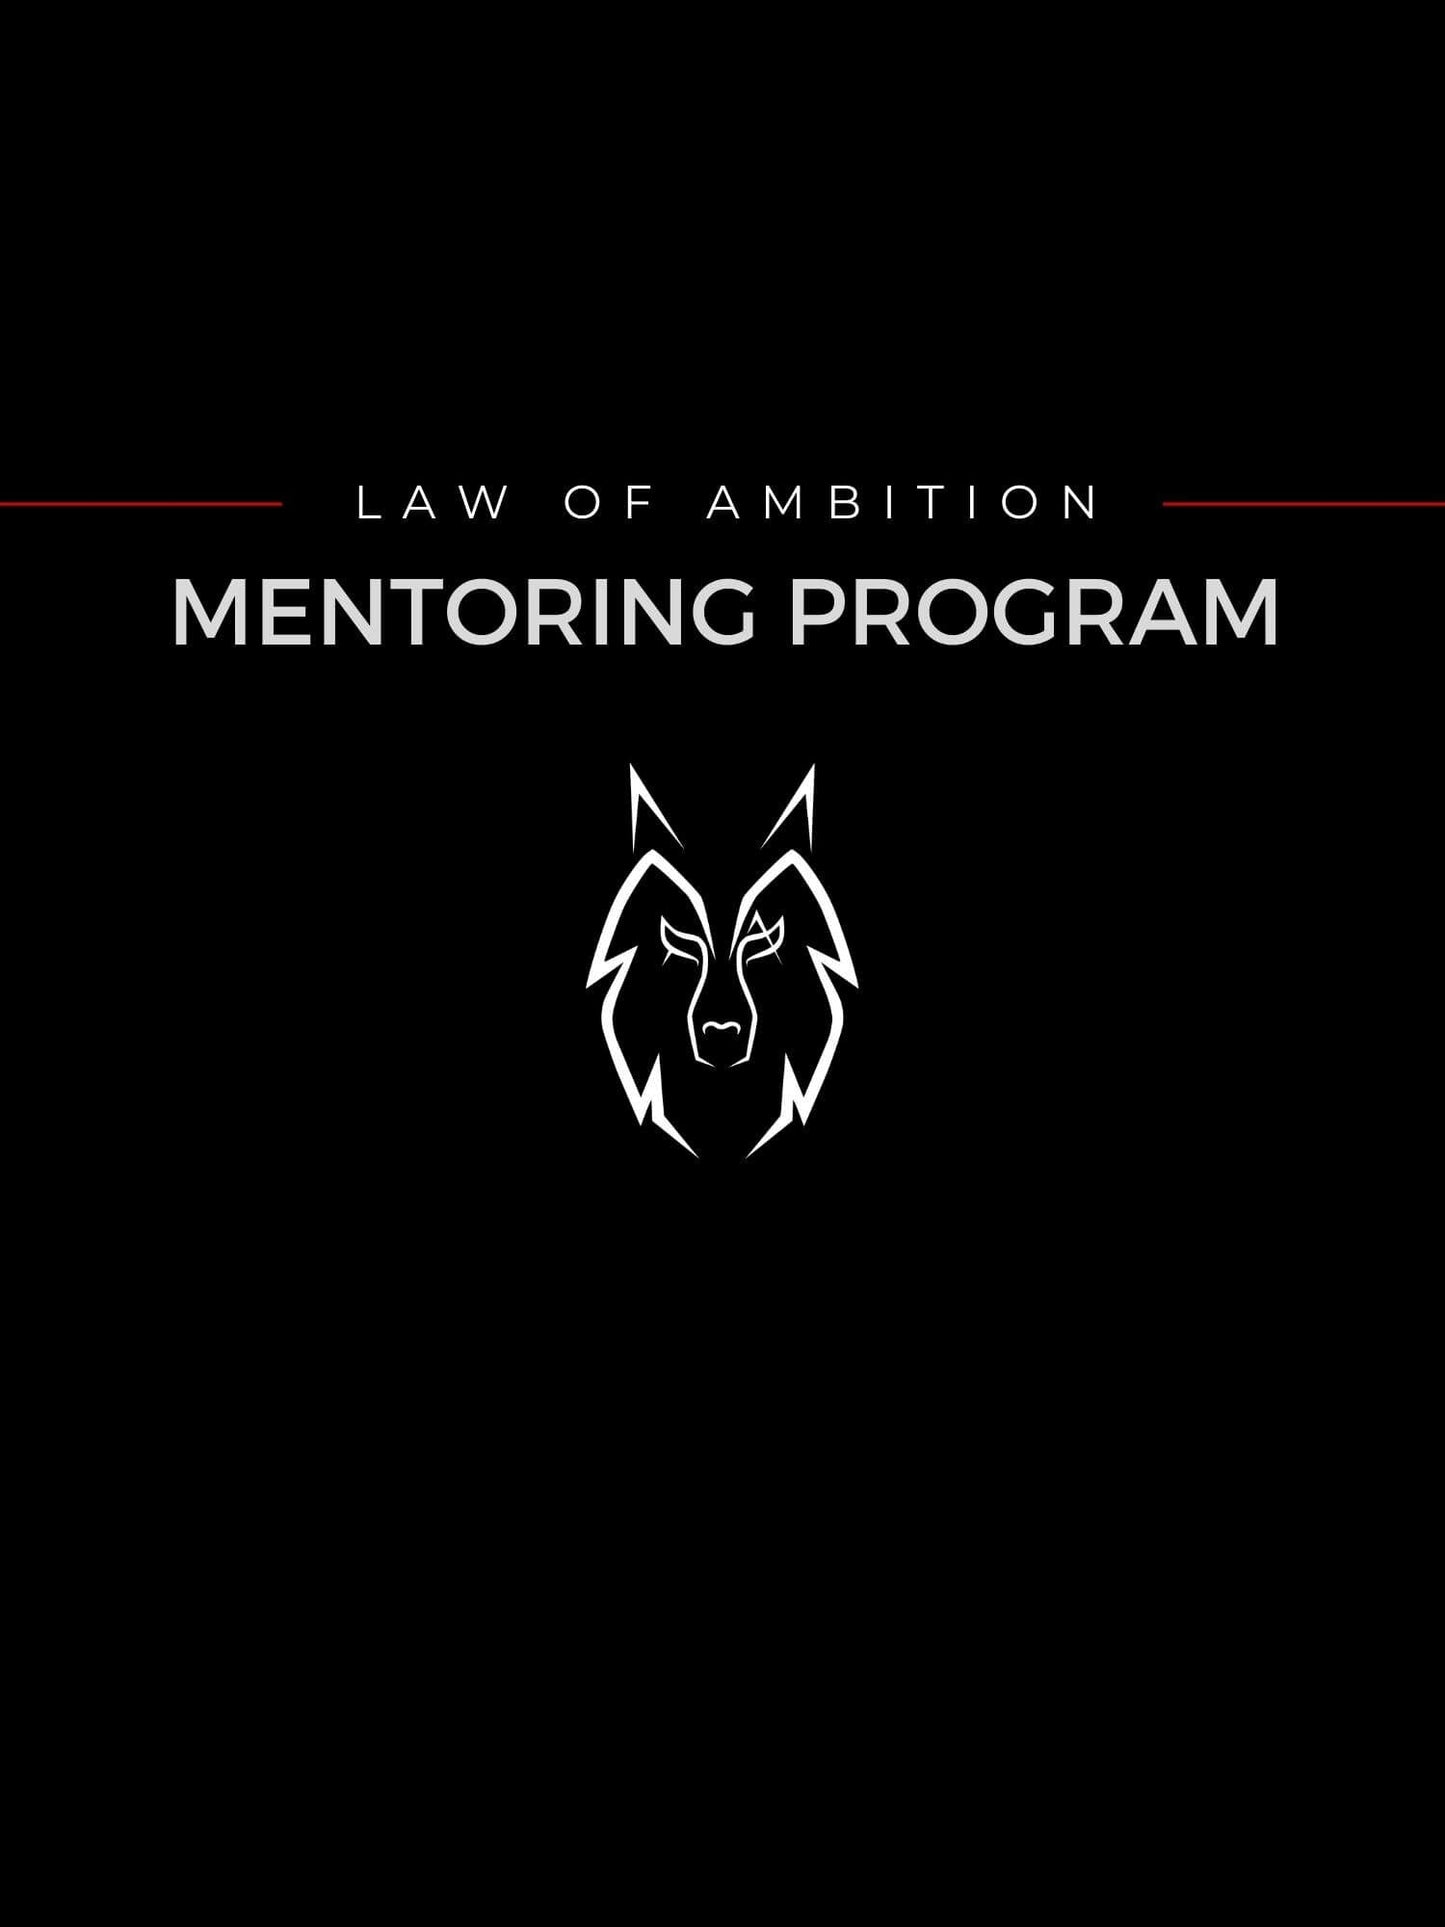 Law of Ambition Mentoring Program